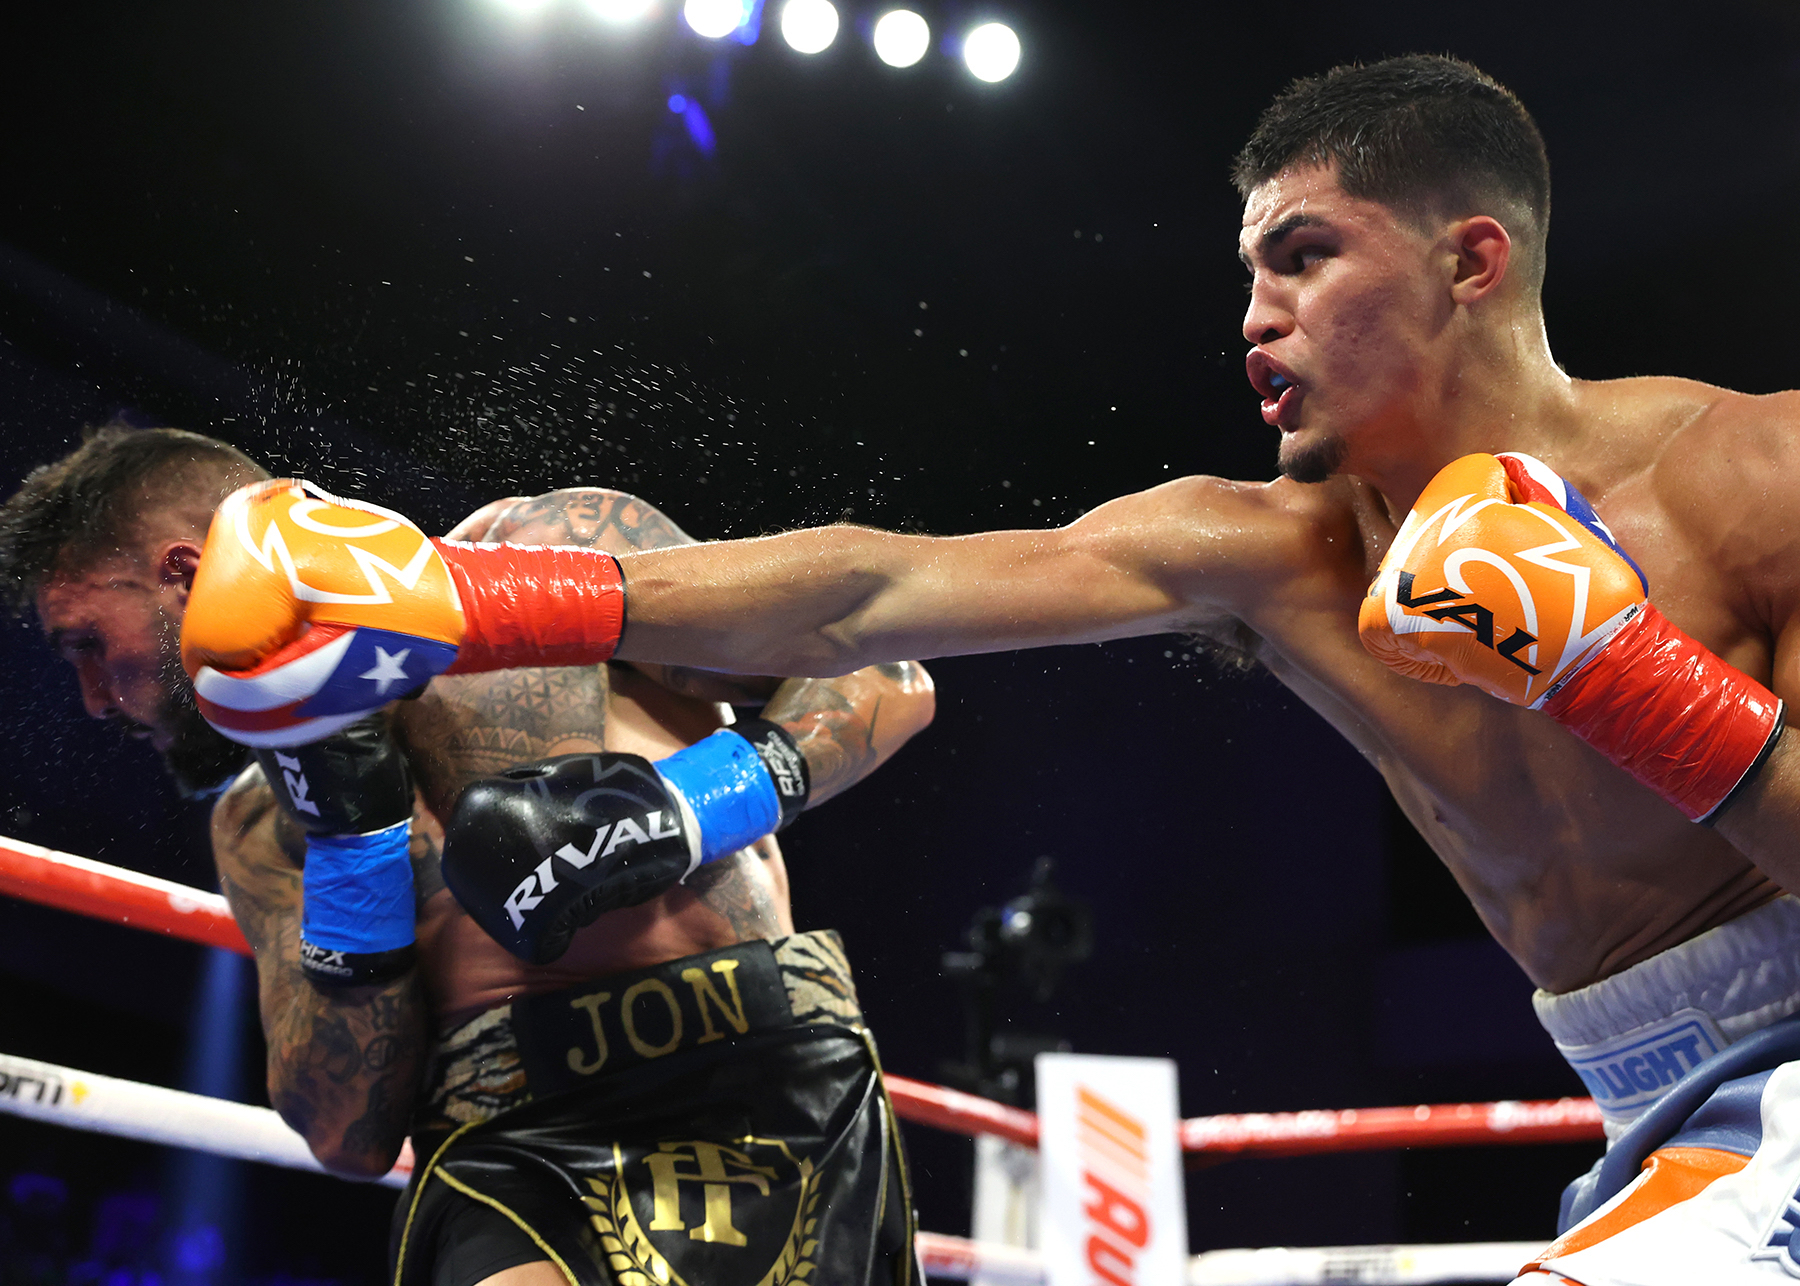 Zayas knocks Fortea down with body shots, then looks forward to February fight with former champ Teixeira